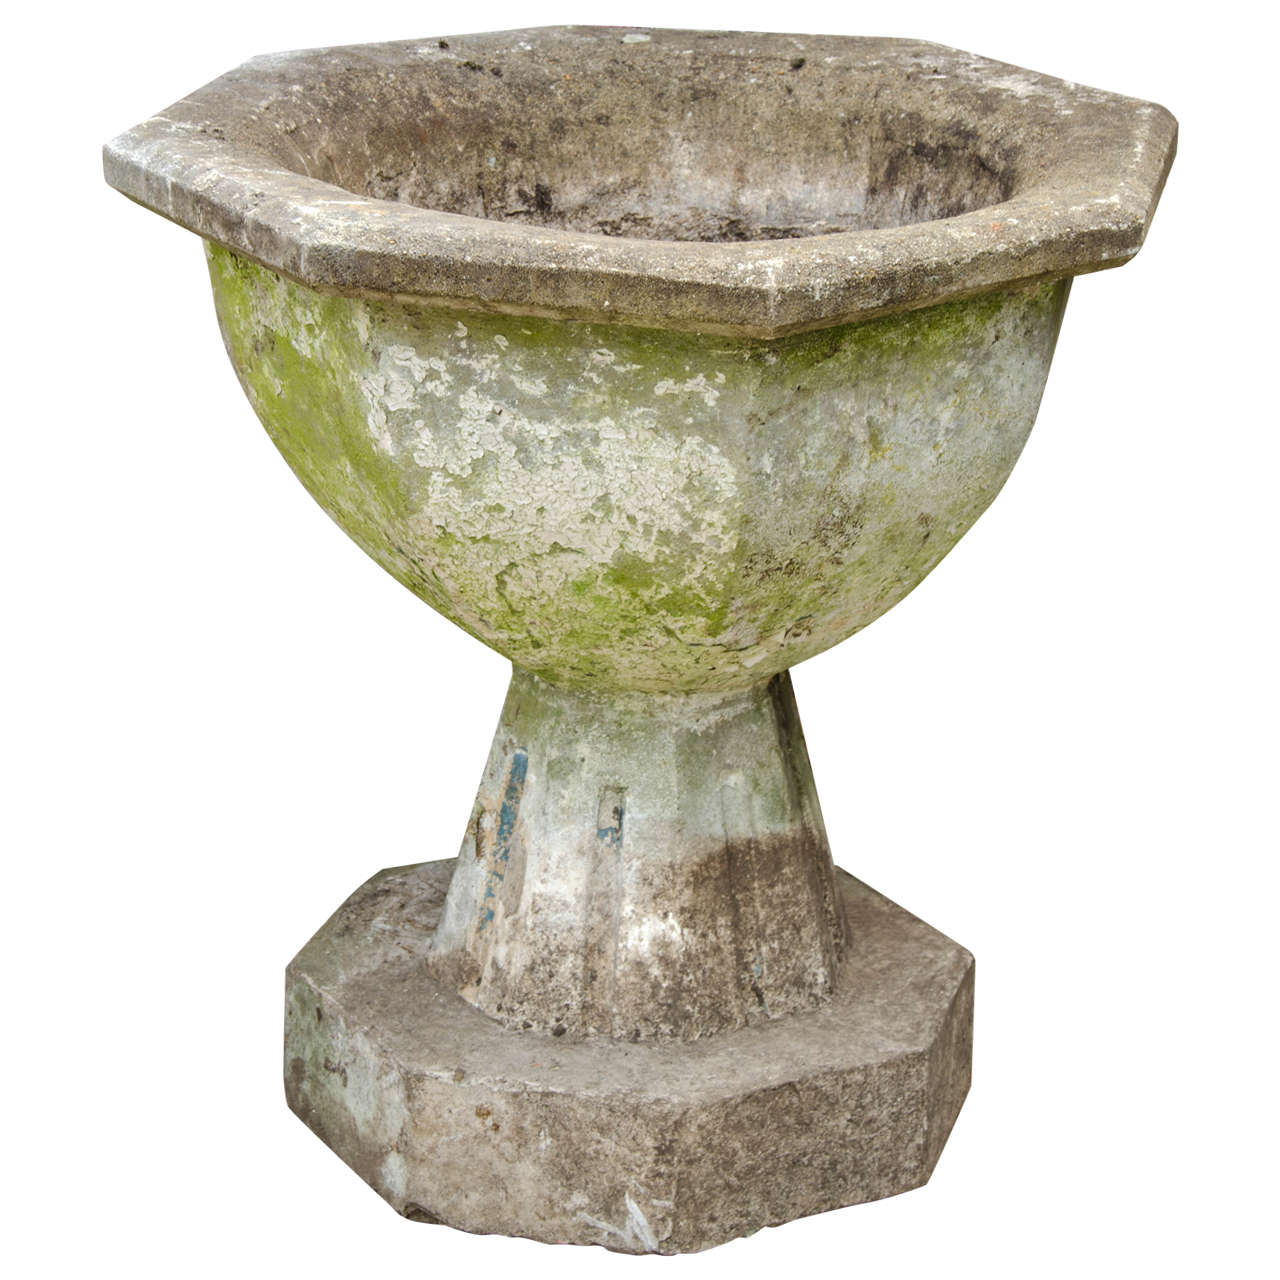 Antique Stone Urn For Sale